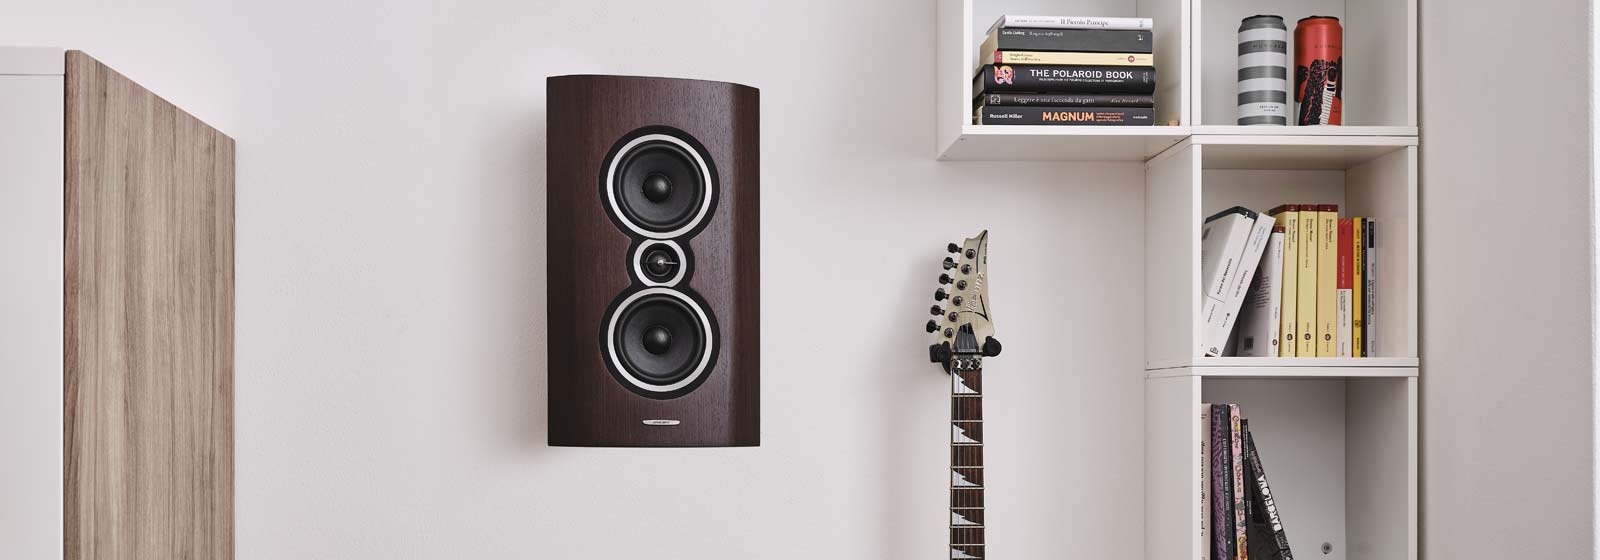 Sonetto-wall-speakers-home-theatre